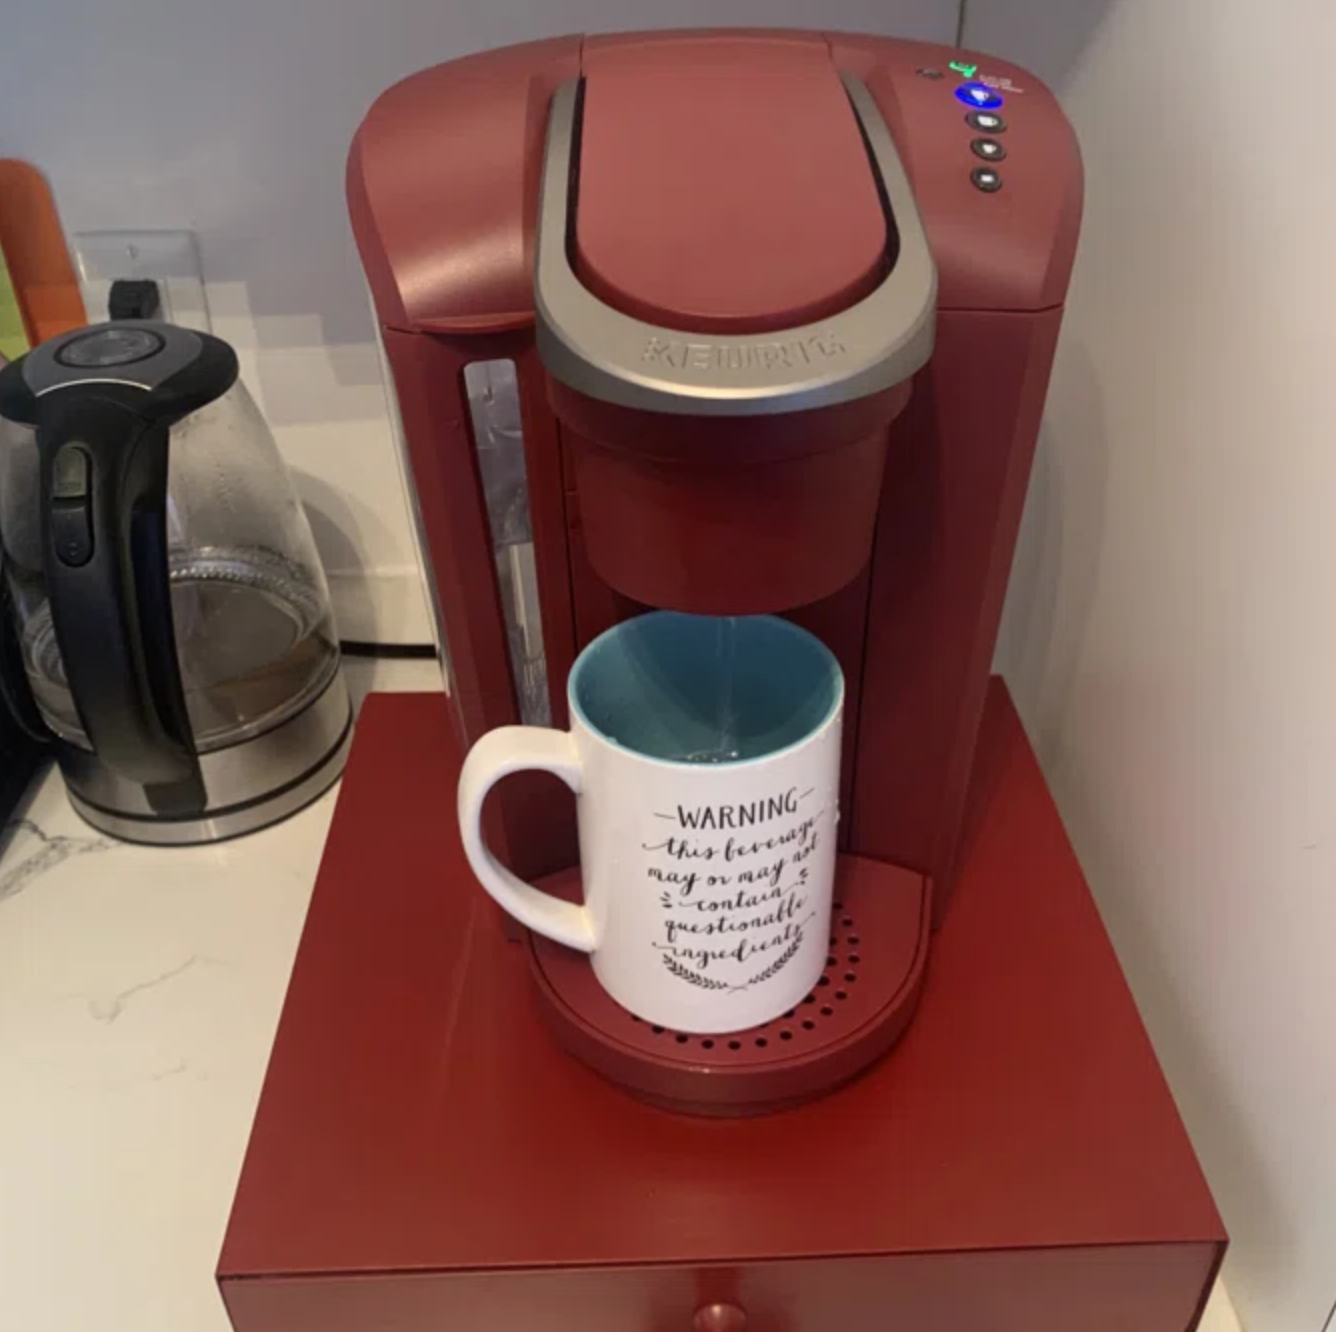 A single-cup coffee maker with a white mug that has a humorous warning about caffeine content